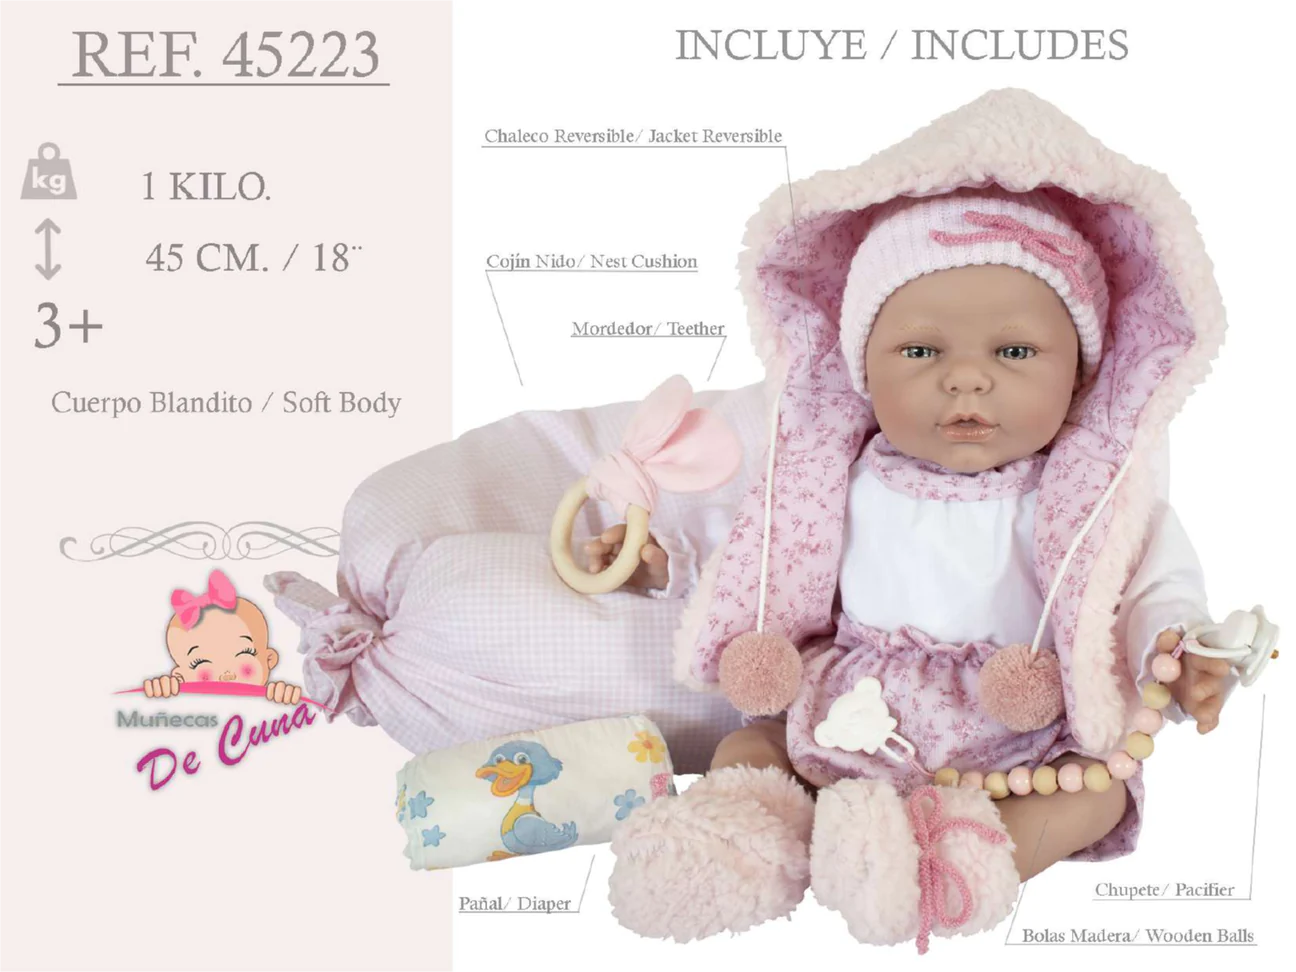 45224 Anyl Reborn Baby Doll Pink Romper - Silicon